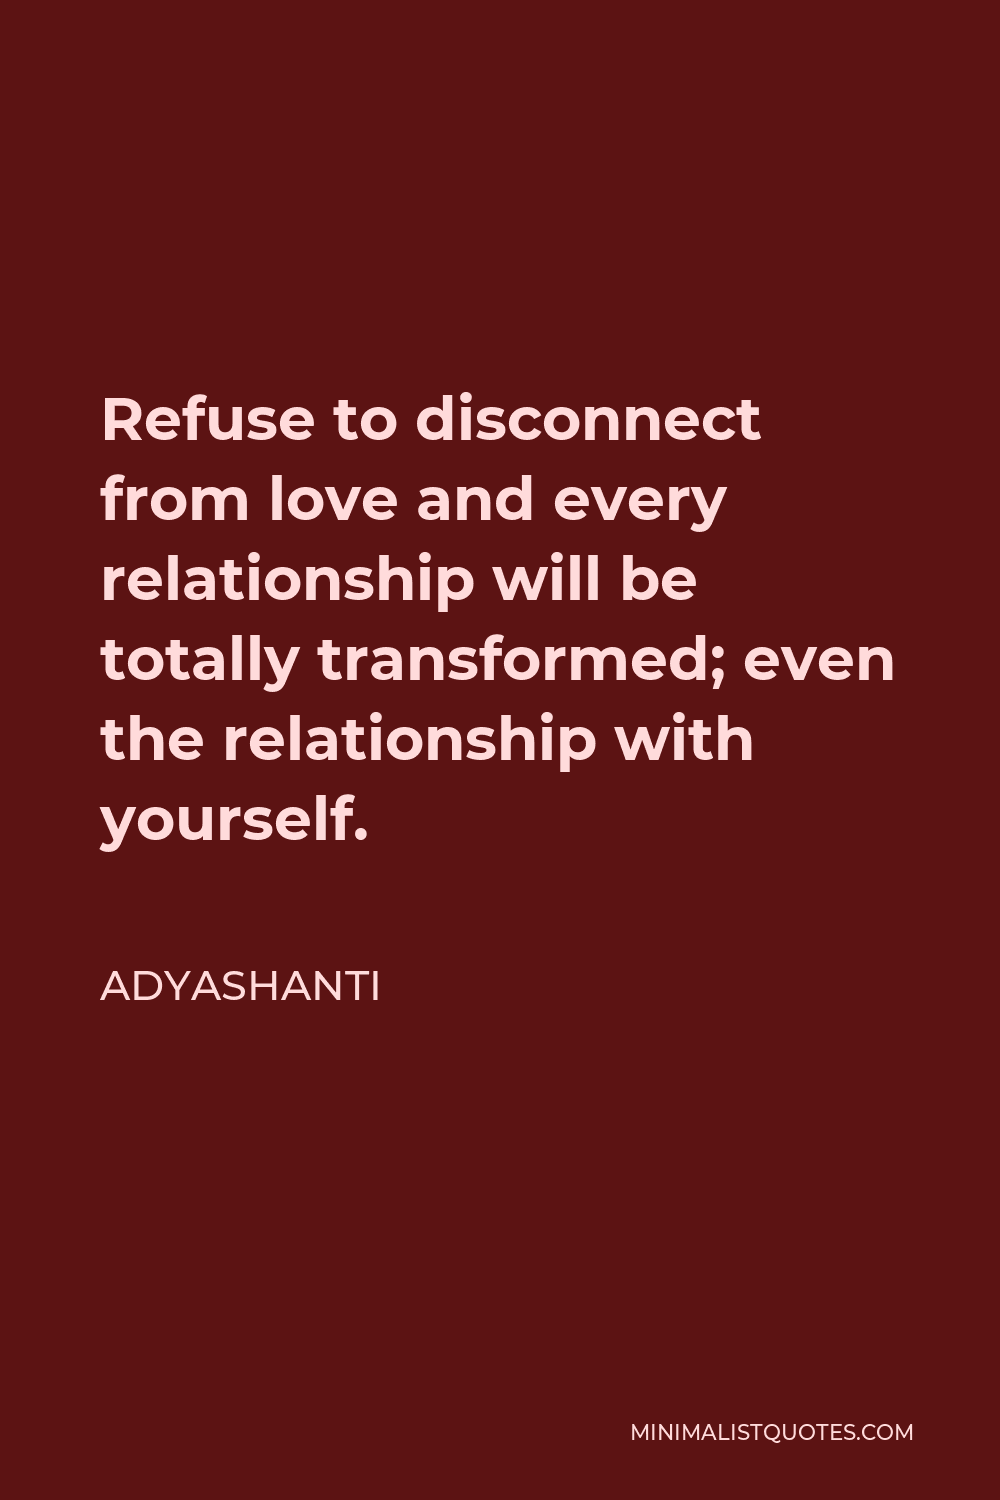 Adyashanti Quote - Refuse to disconnect from love and every relationship will be totally transformed; even the relationship with yourself.